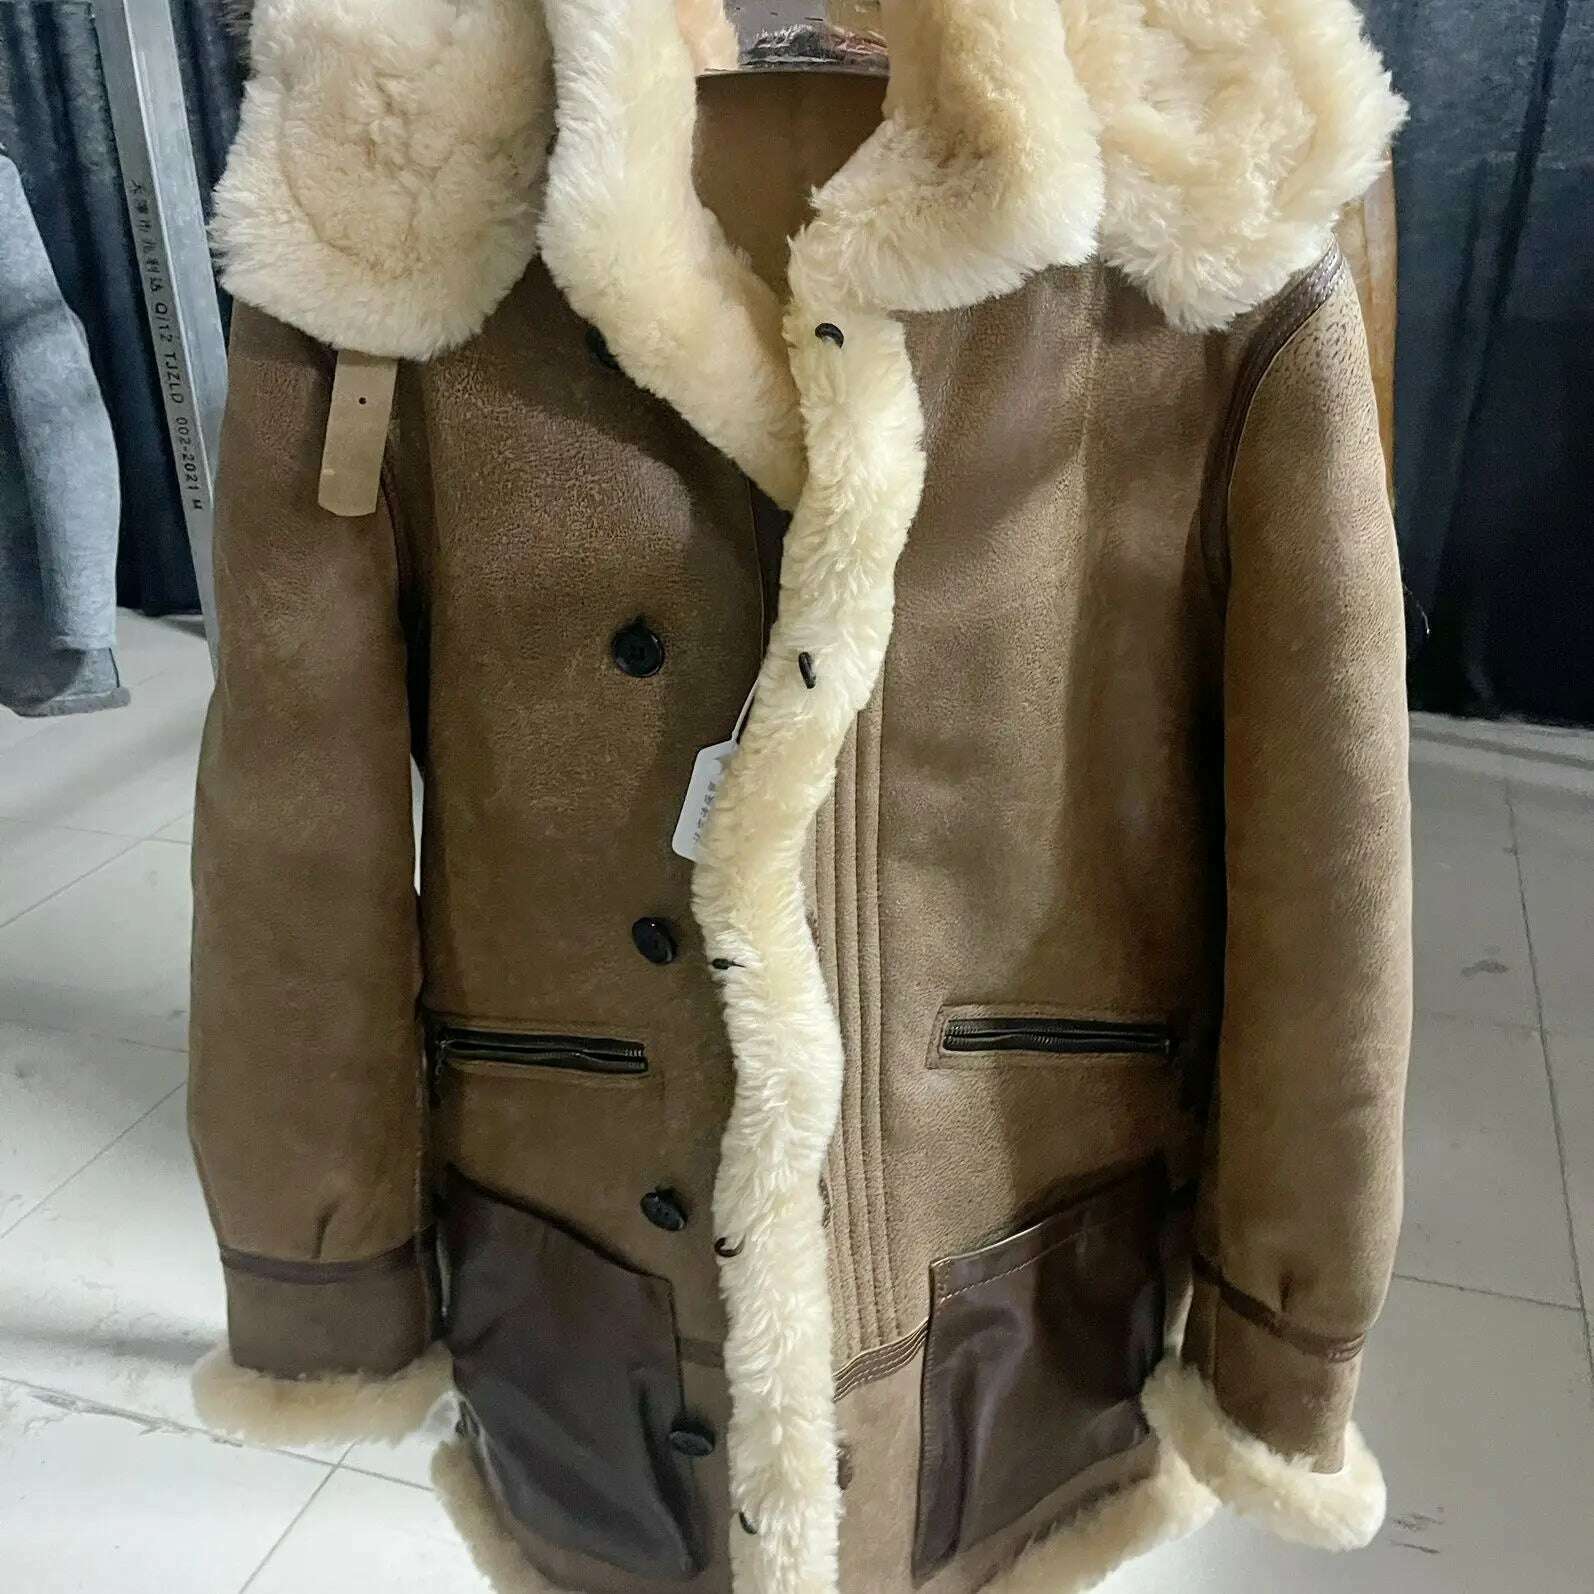 KIMLUD, Winter Men Original Fur Coat Mid-length Thickened Sheepskin Leather Coat Bomber Hooded Wool Lining Warm Snow Men's Clothing, brown / S, KIMLUD Women's Clothes